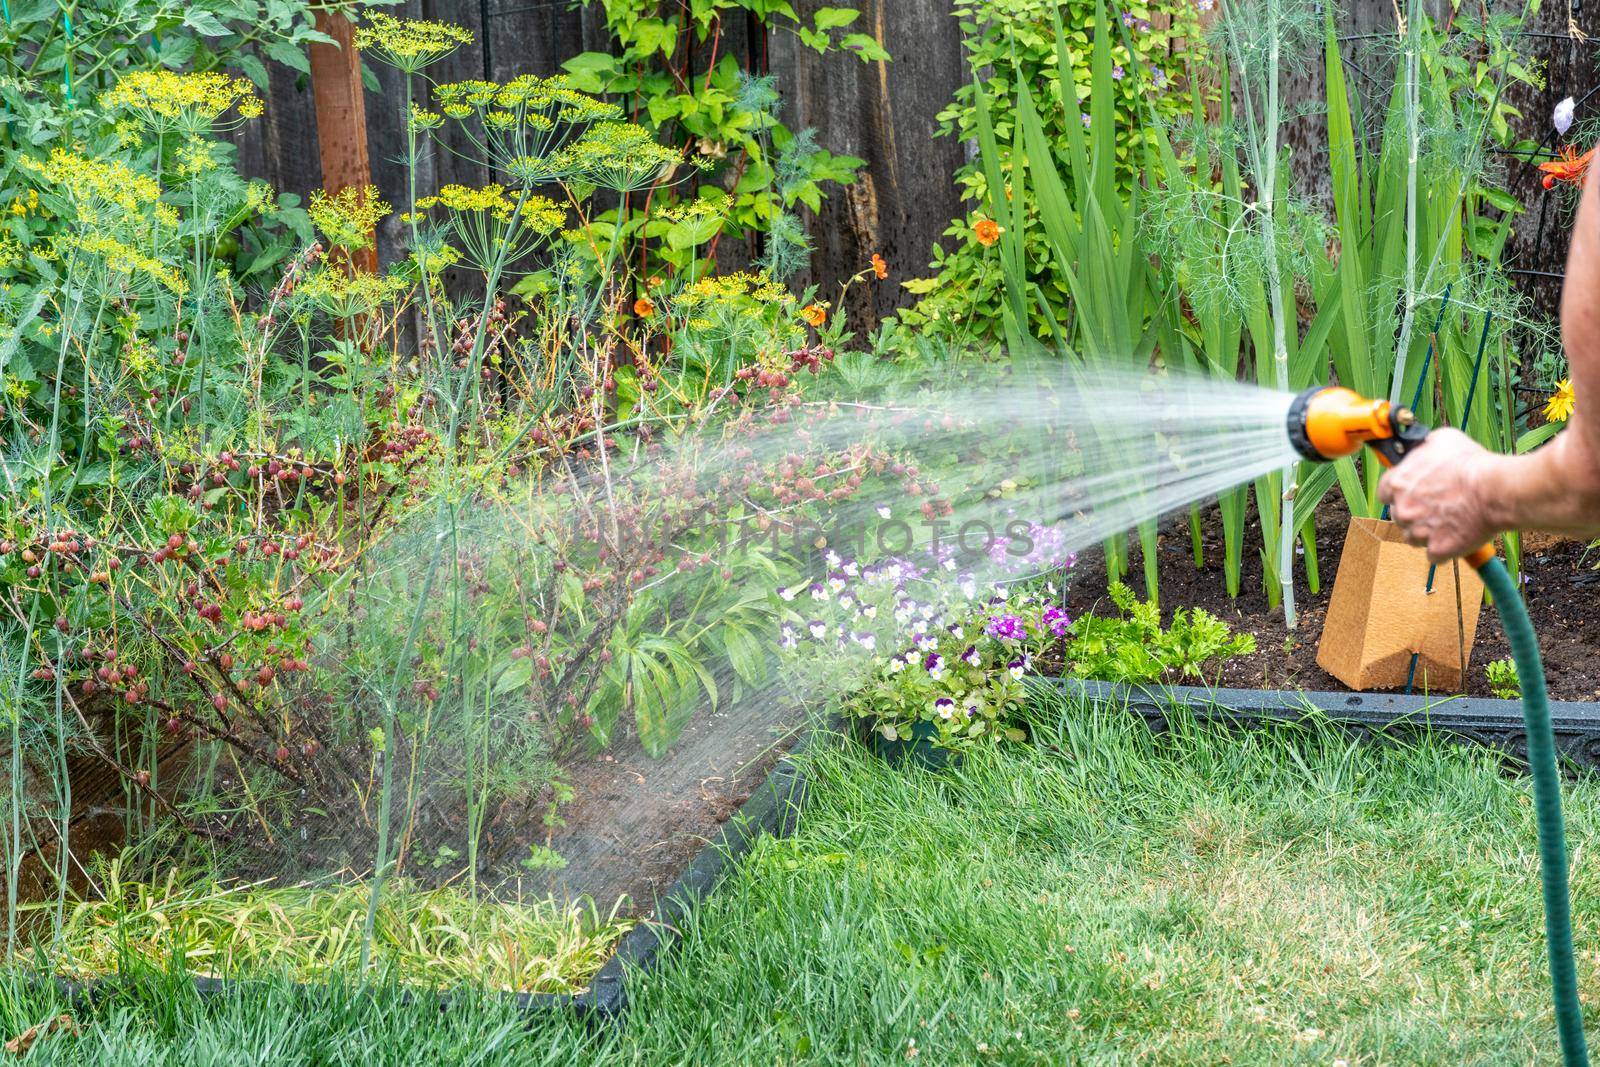 Watering gooseberries from a soft water hose with a sprinkler